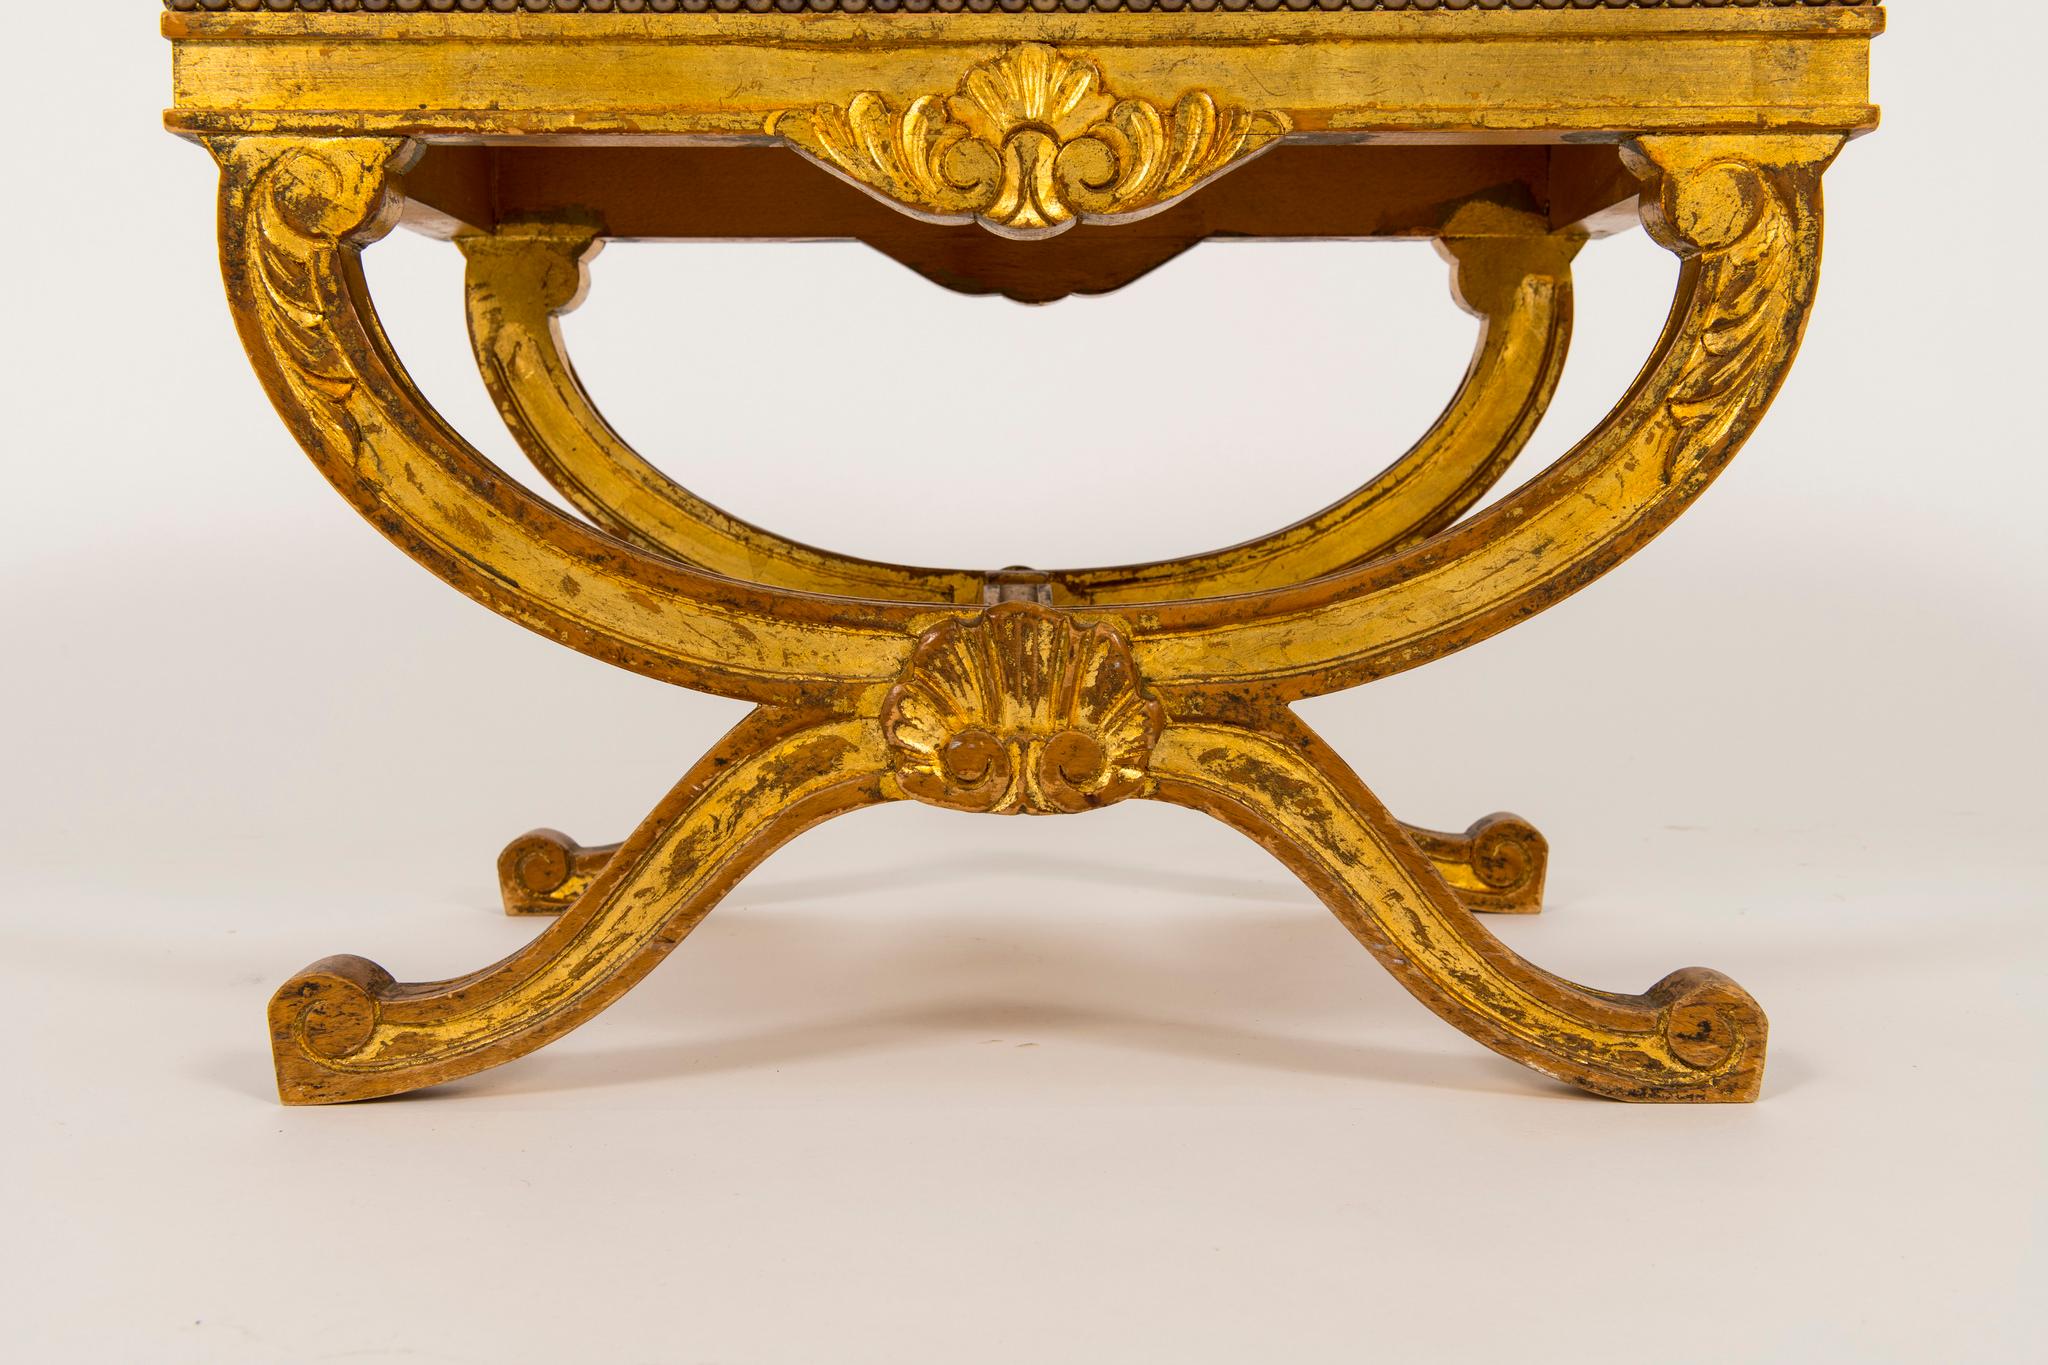 A pair of 20th century Louis XV style giltwood tabourets newly upholstered in a Dedar tiger cut velvet.